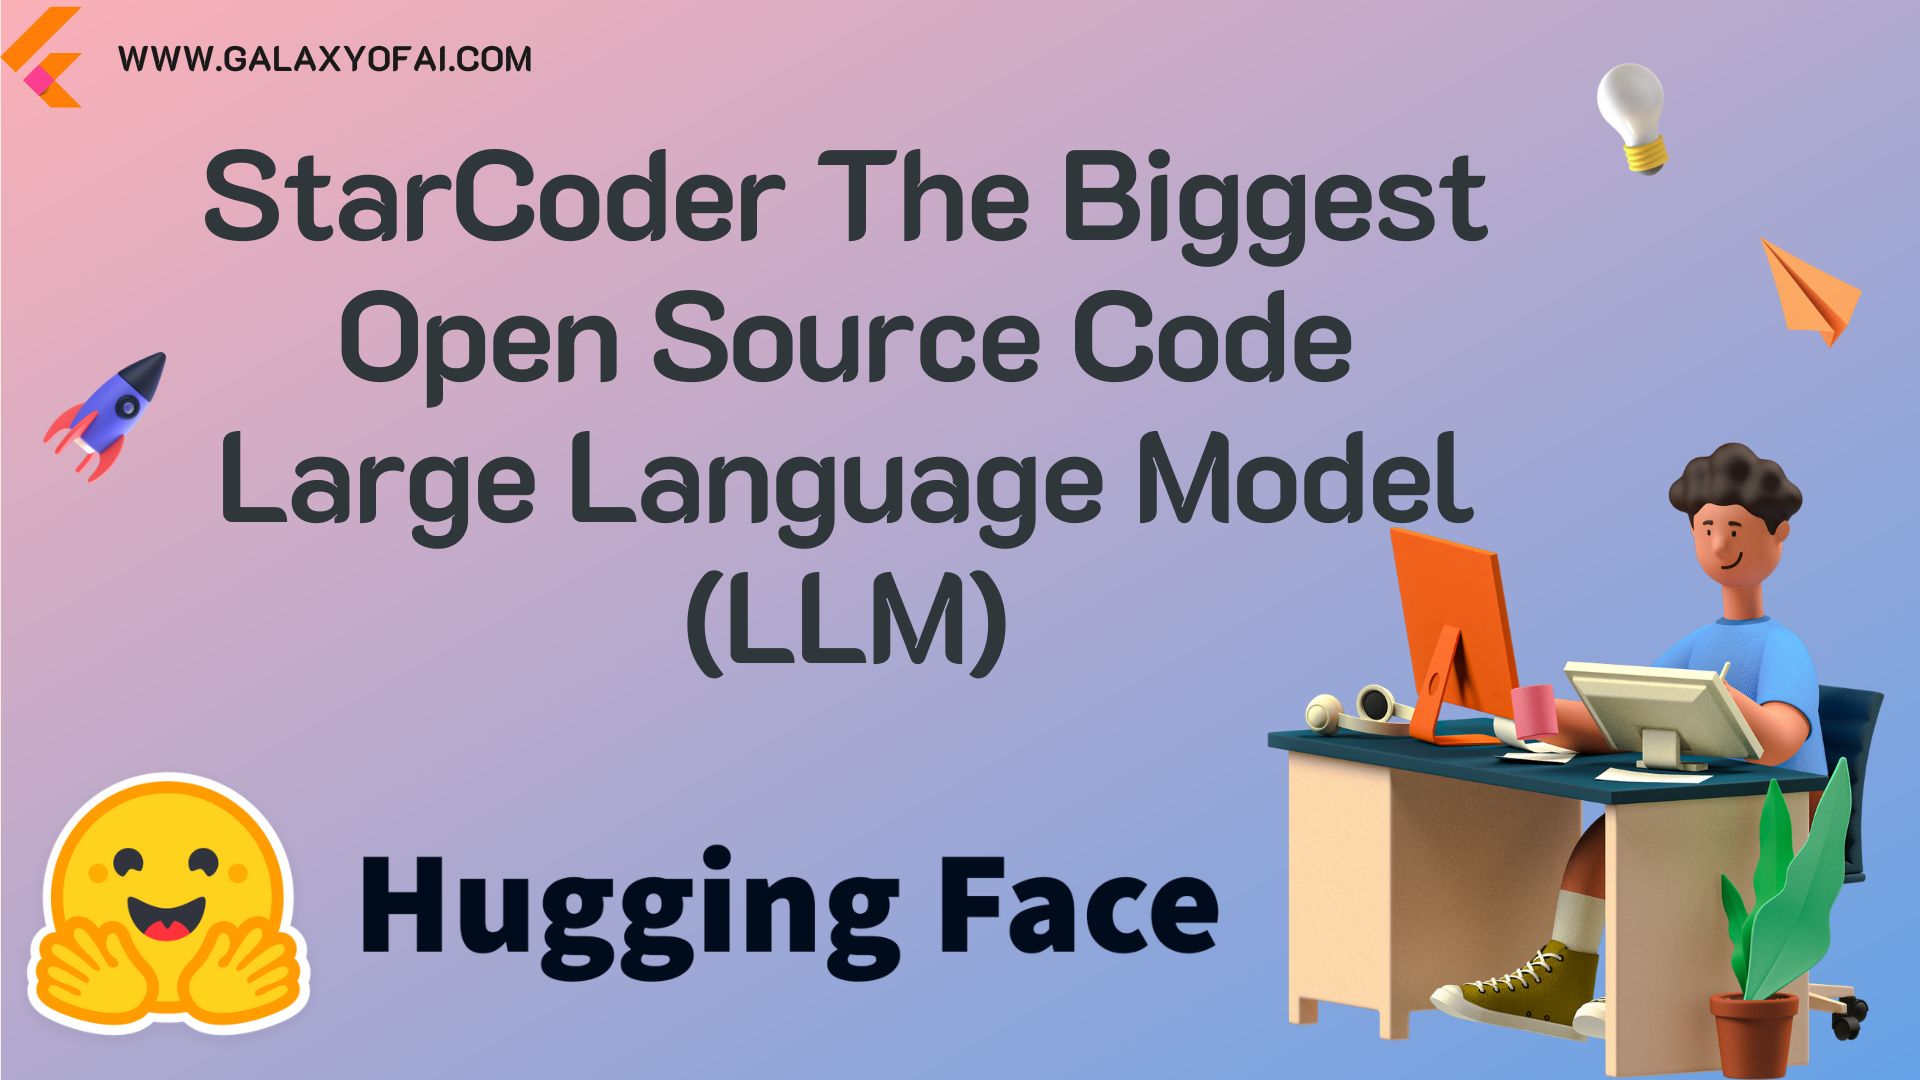 StarCoder The Biggest Open Source Code Large Language Model (LLM)